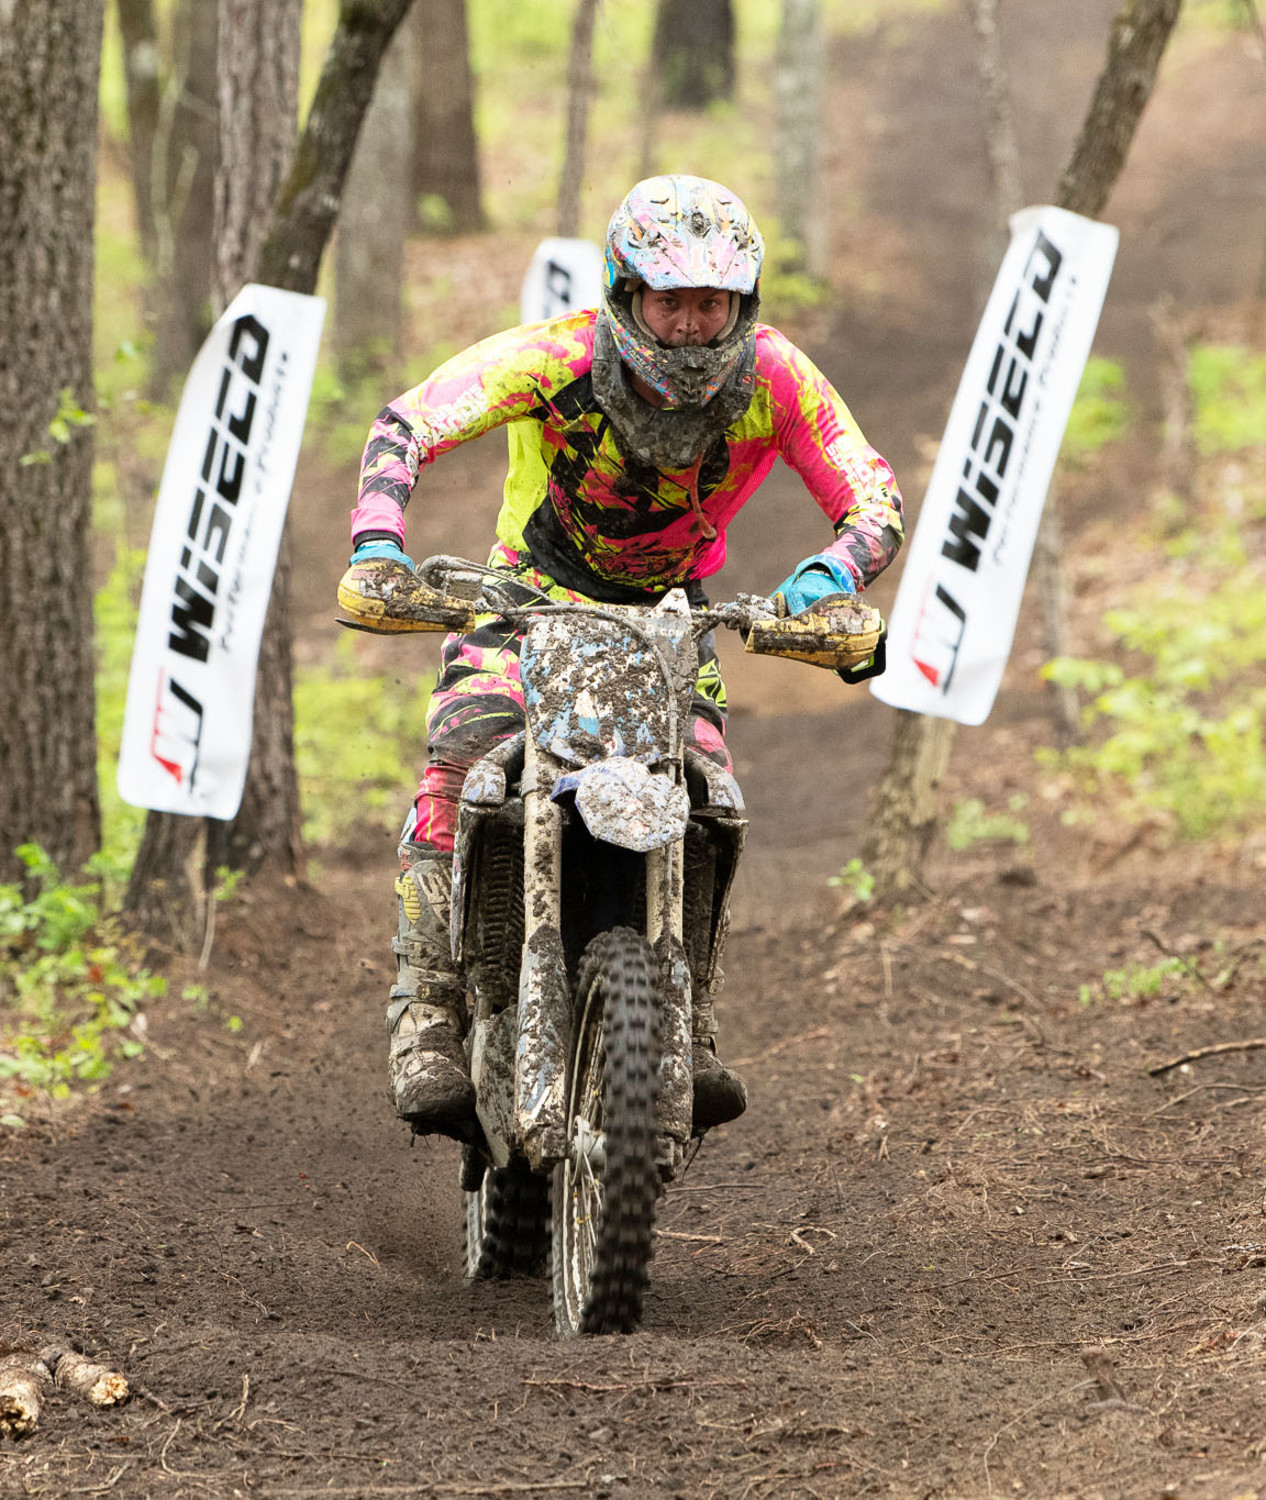 Sumter native Josh McCoy tries his luck at the GNCC Manning Live